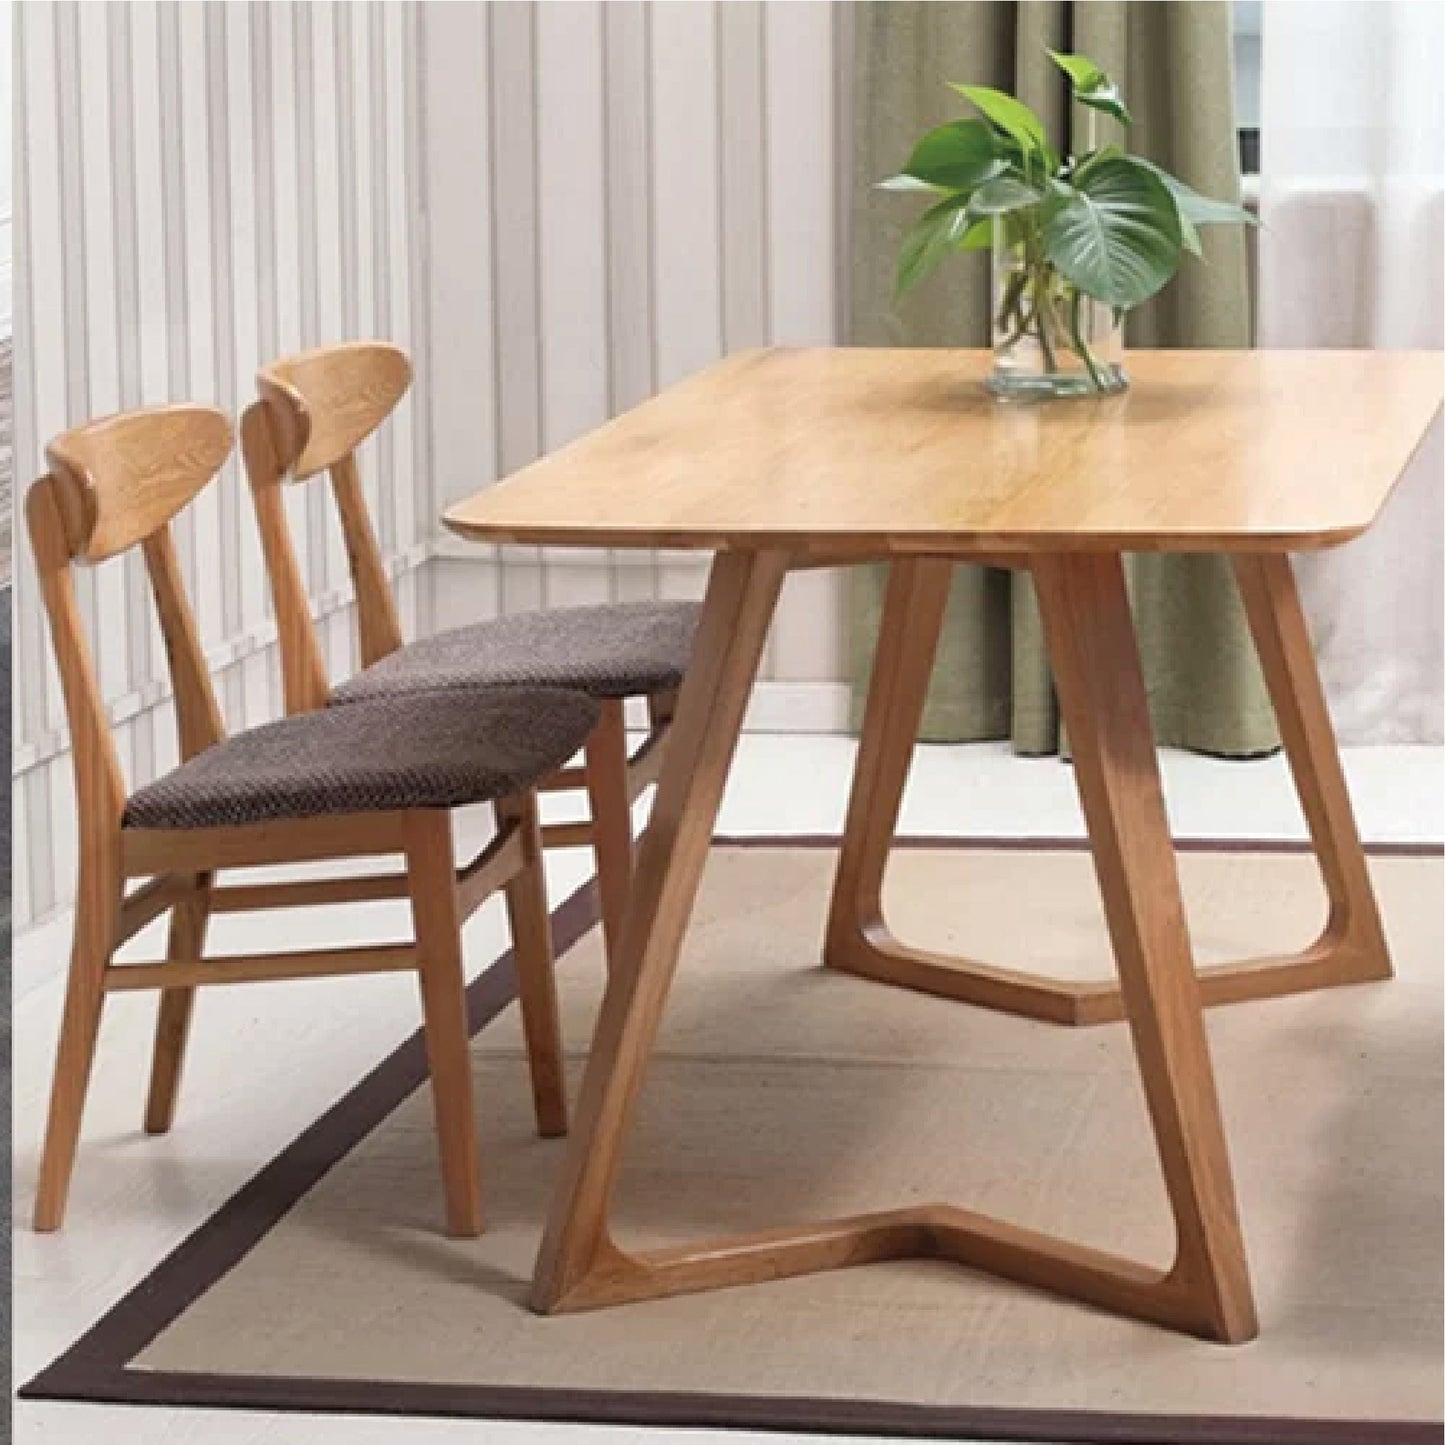 Chopin solid wood dining chairs (set of two)